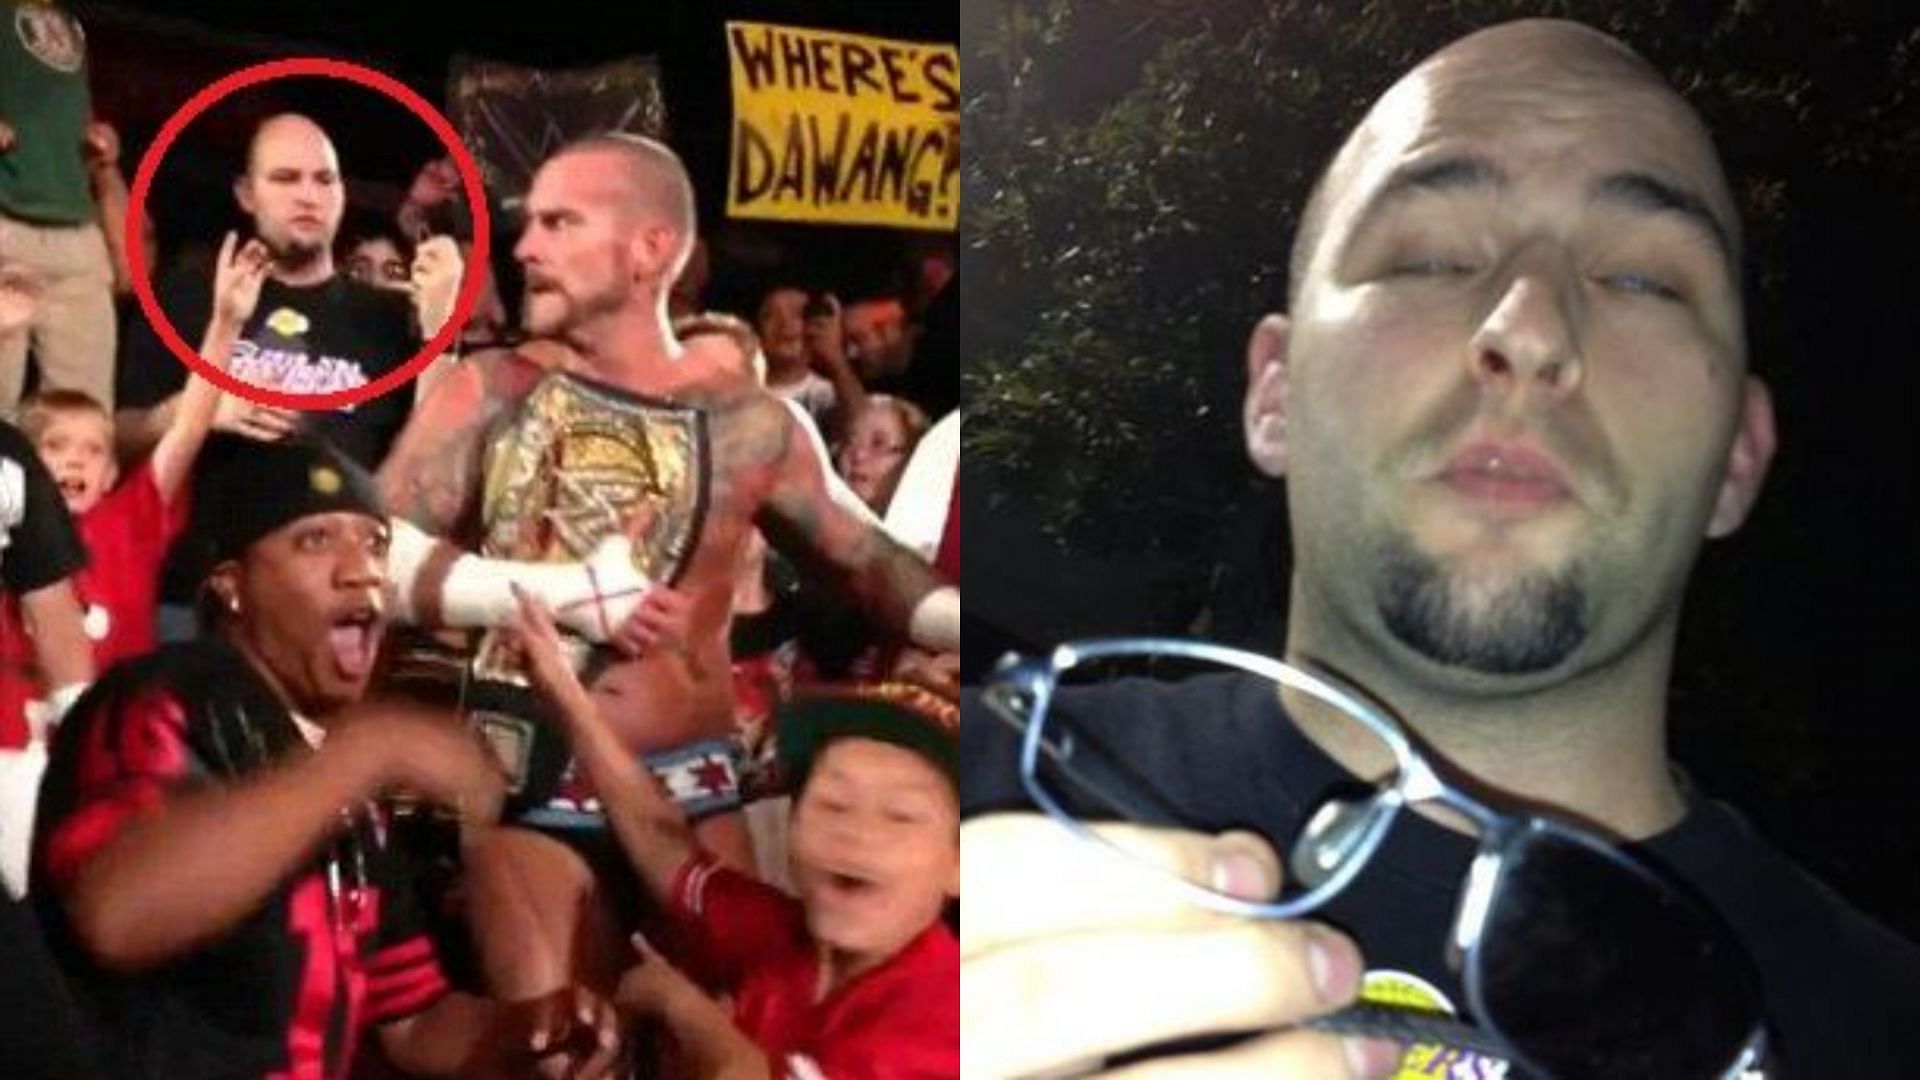 CM Punk attacked a fan during an episode of Monday Night RAW